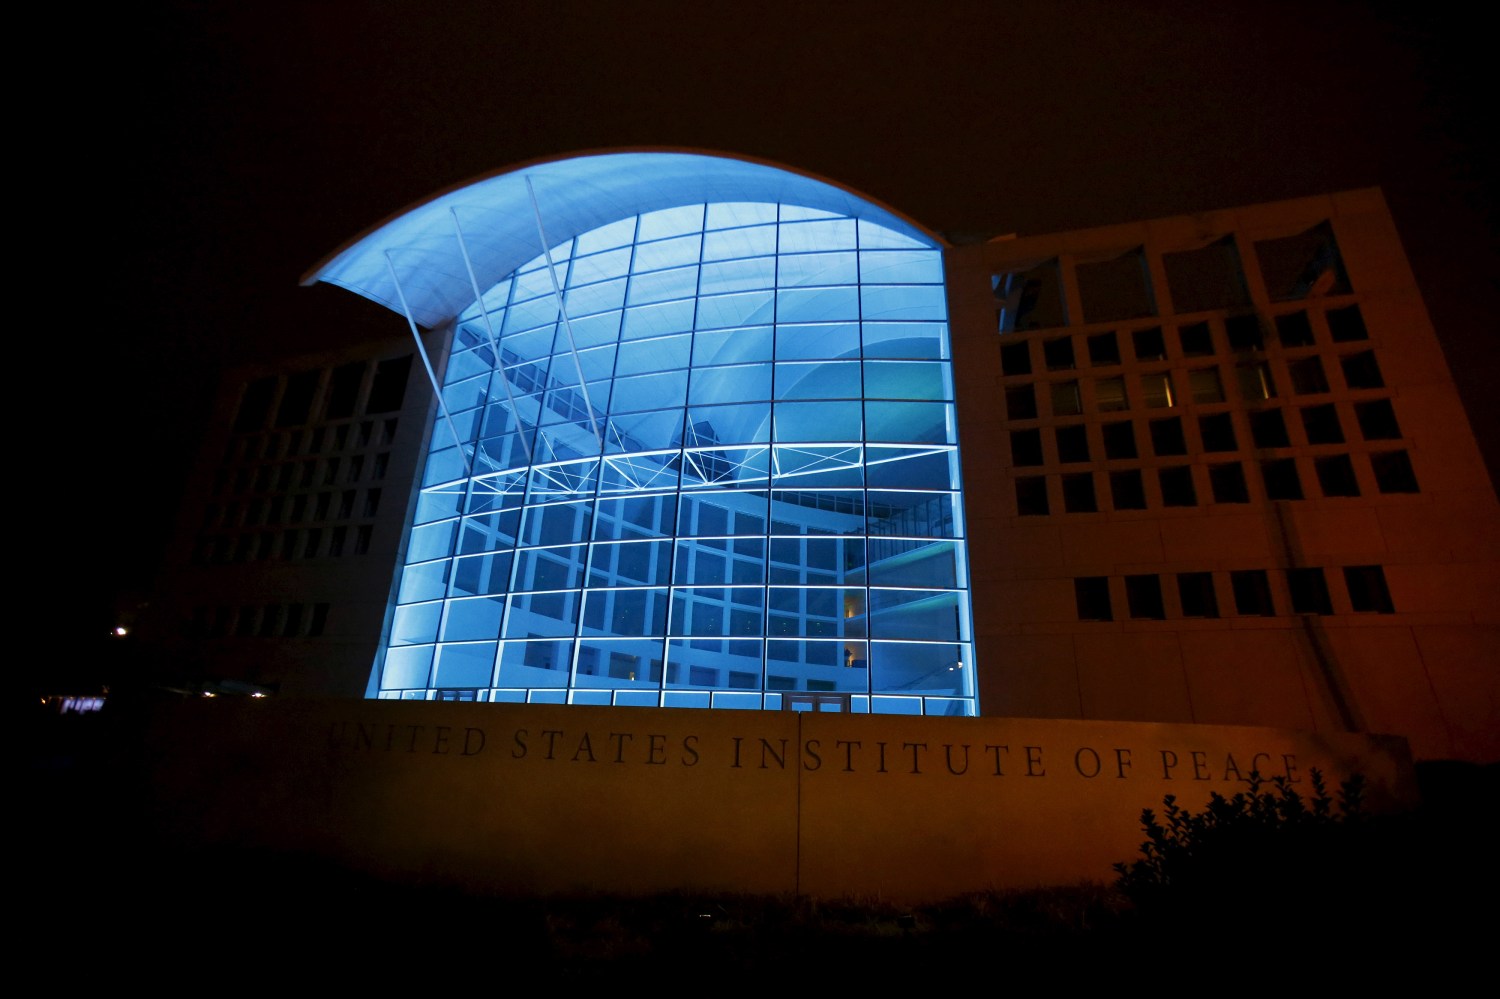 United States Institute of Peace (USIP) in Washington is lit up in blue as part of a United Nations global event to mark the 70th anniversary of the UN's founding October 24, 2015. REUTERS/Yuri Gripas - GF20000031592